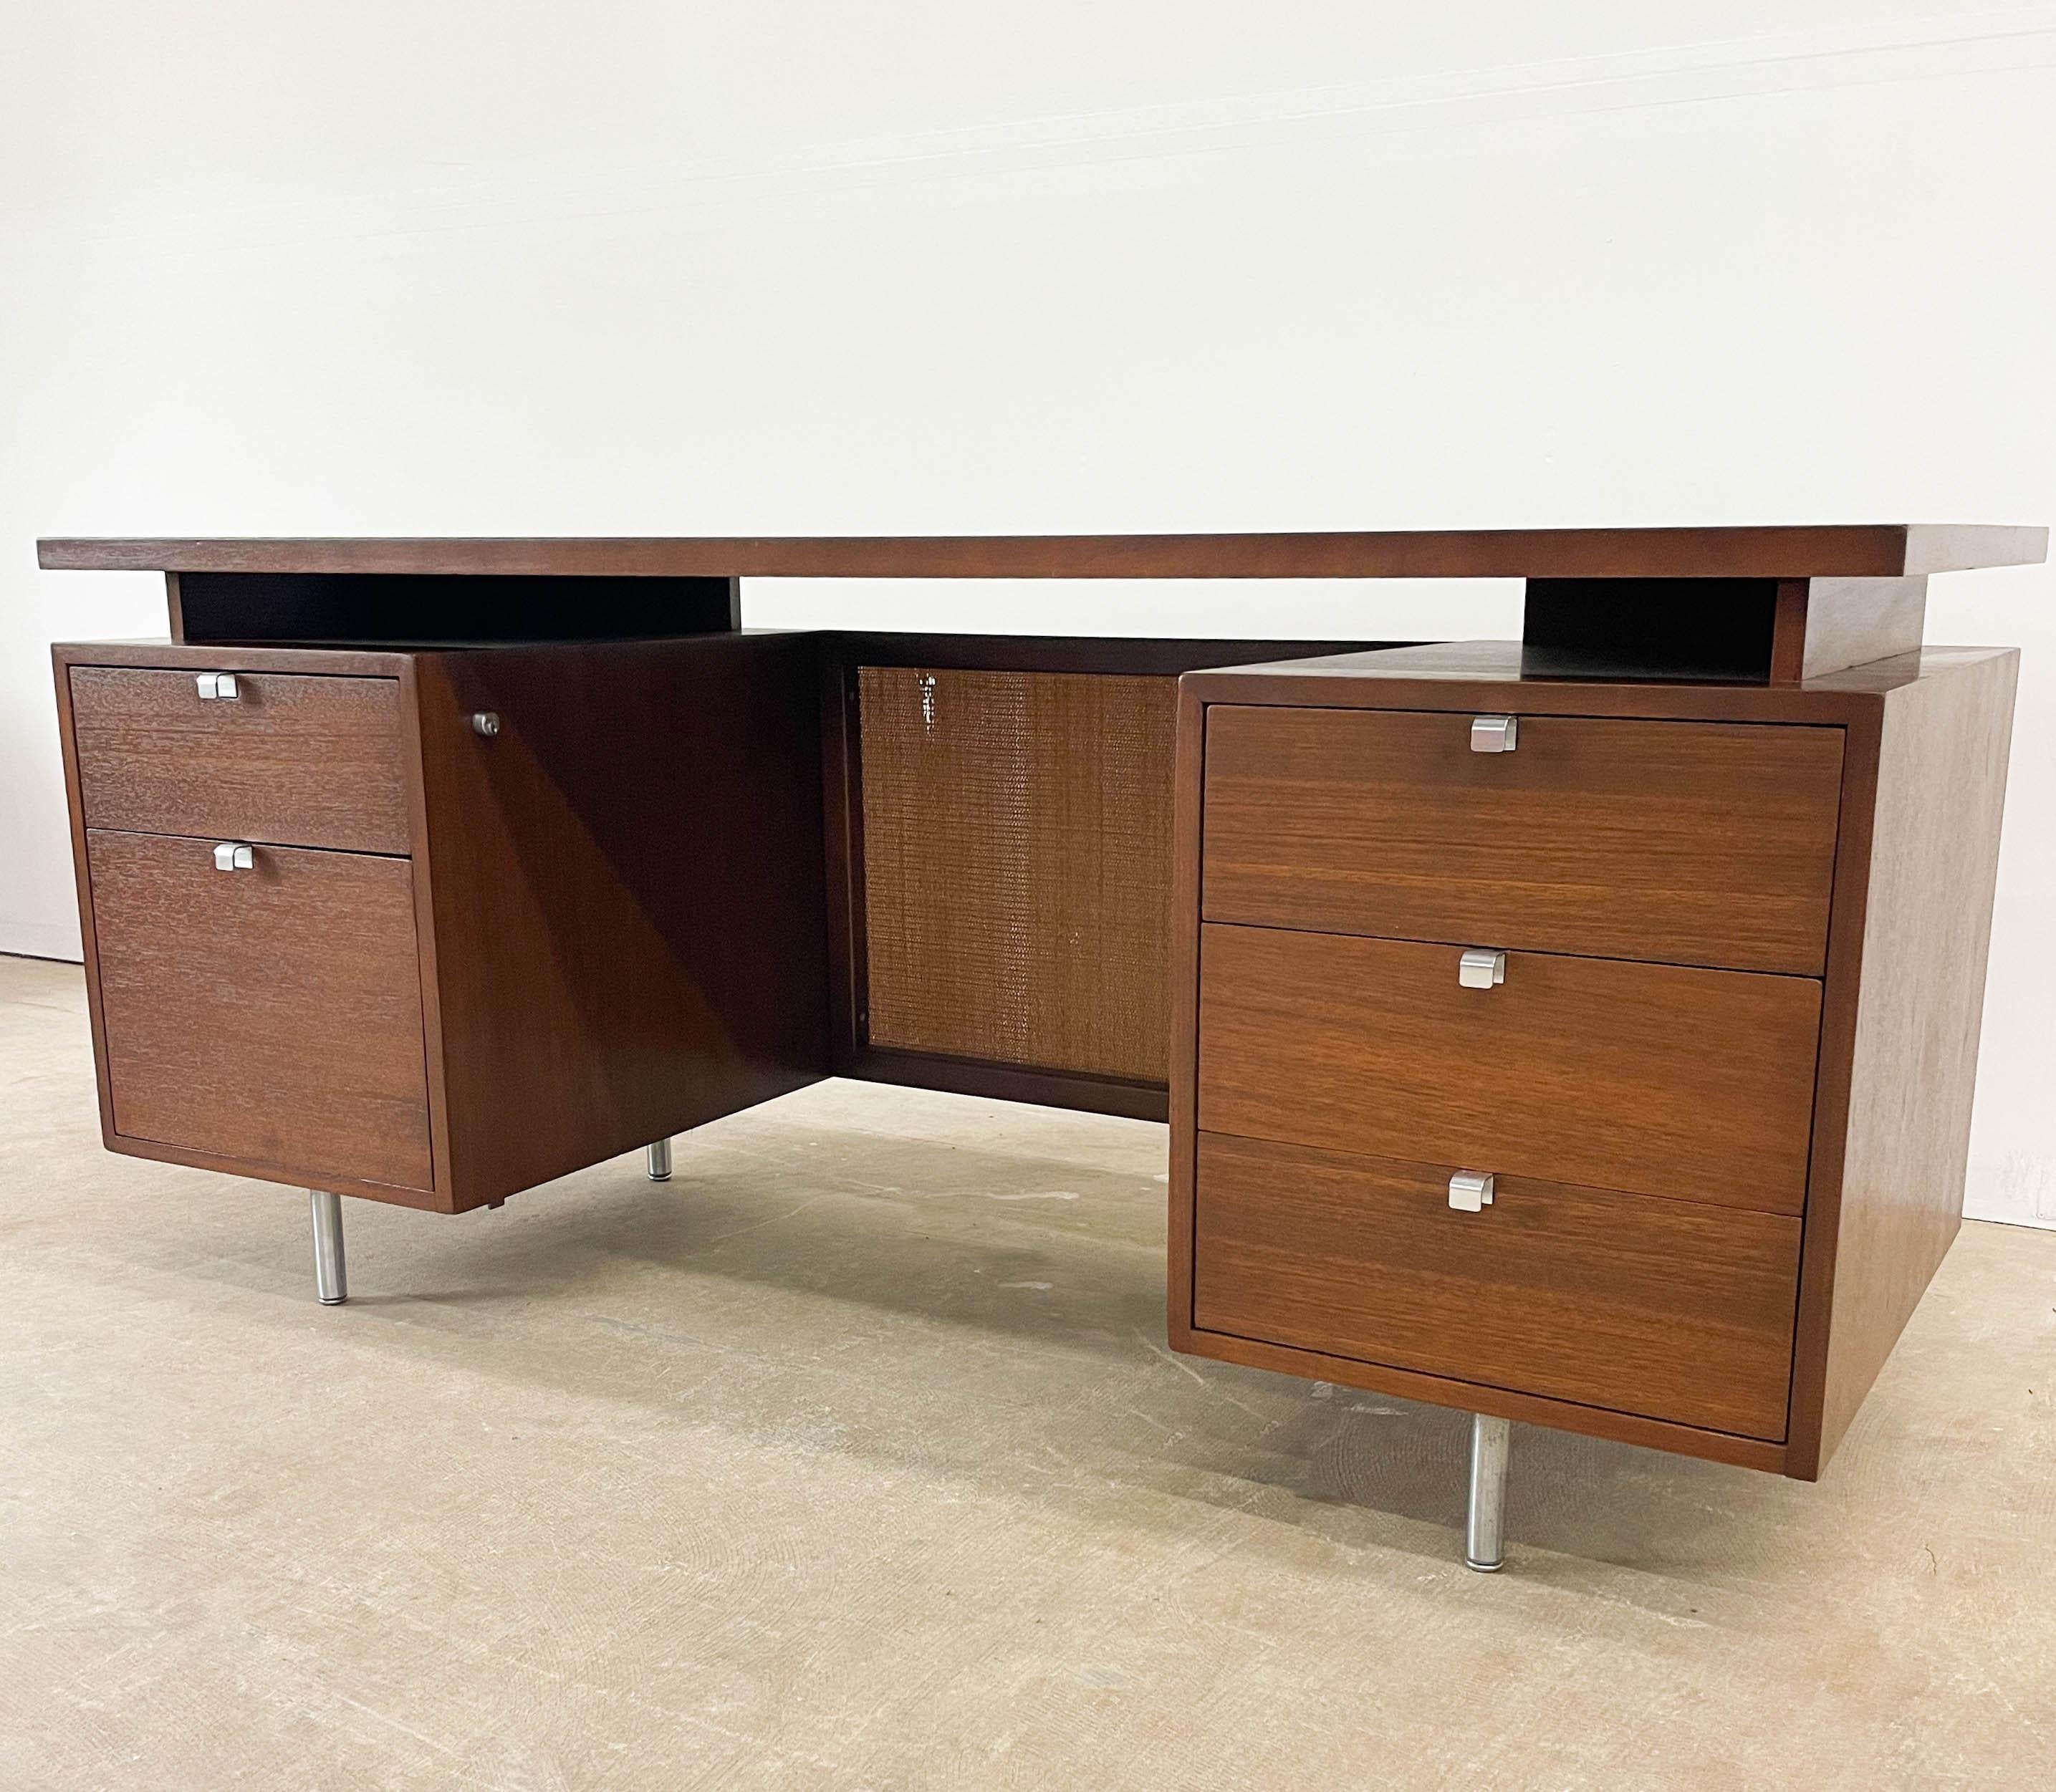 This is a stunning 1949 design from George Nelson for Herman Miller as part of the EOG Executive Office Group. The desk offers drawers on either side of the walnut pedestals as well as original chrome pulls and interior dividers in the drawers. The